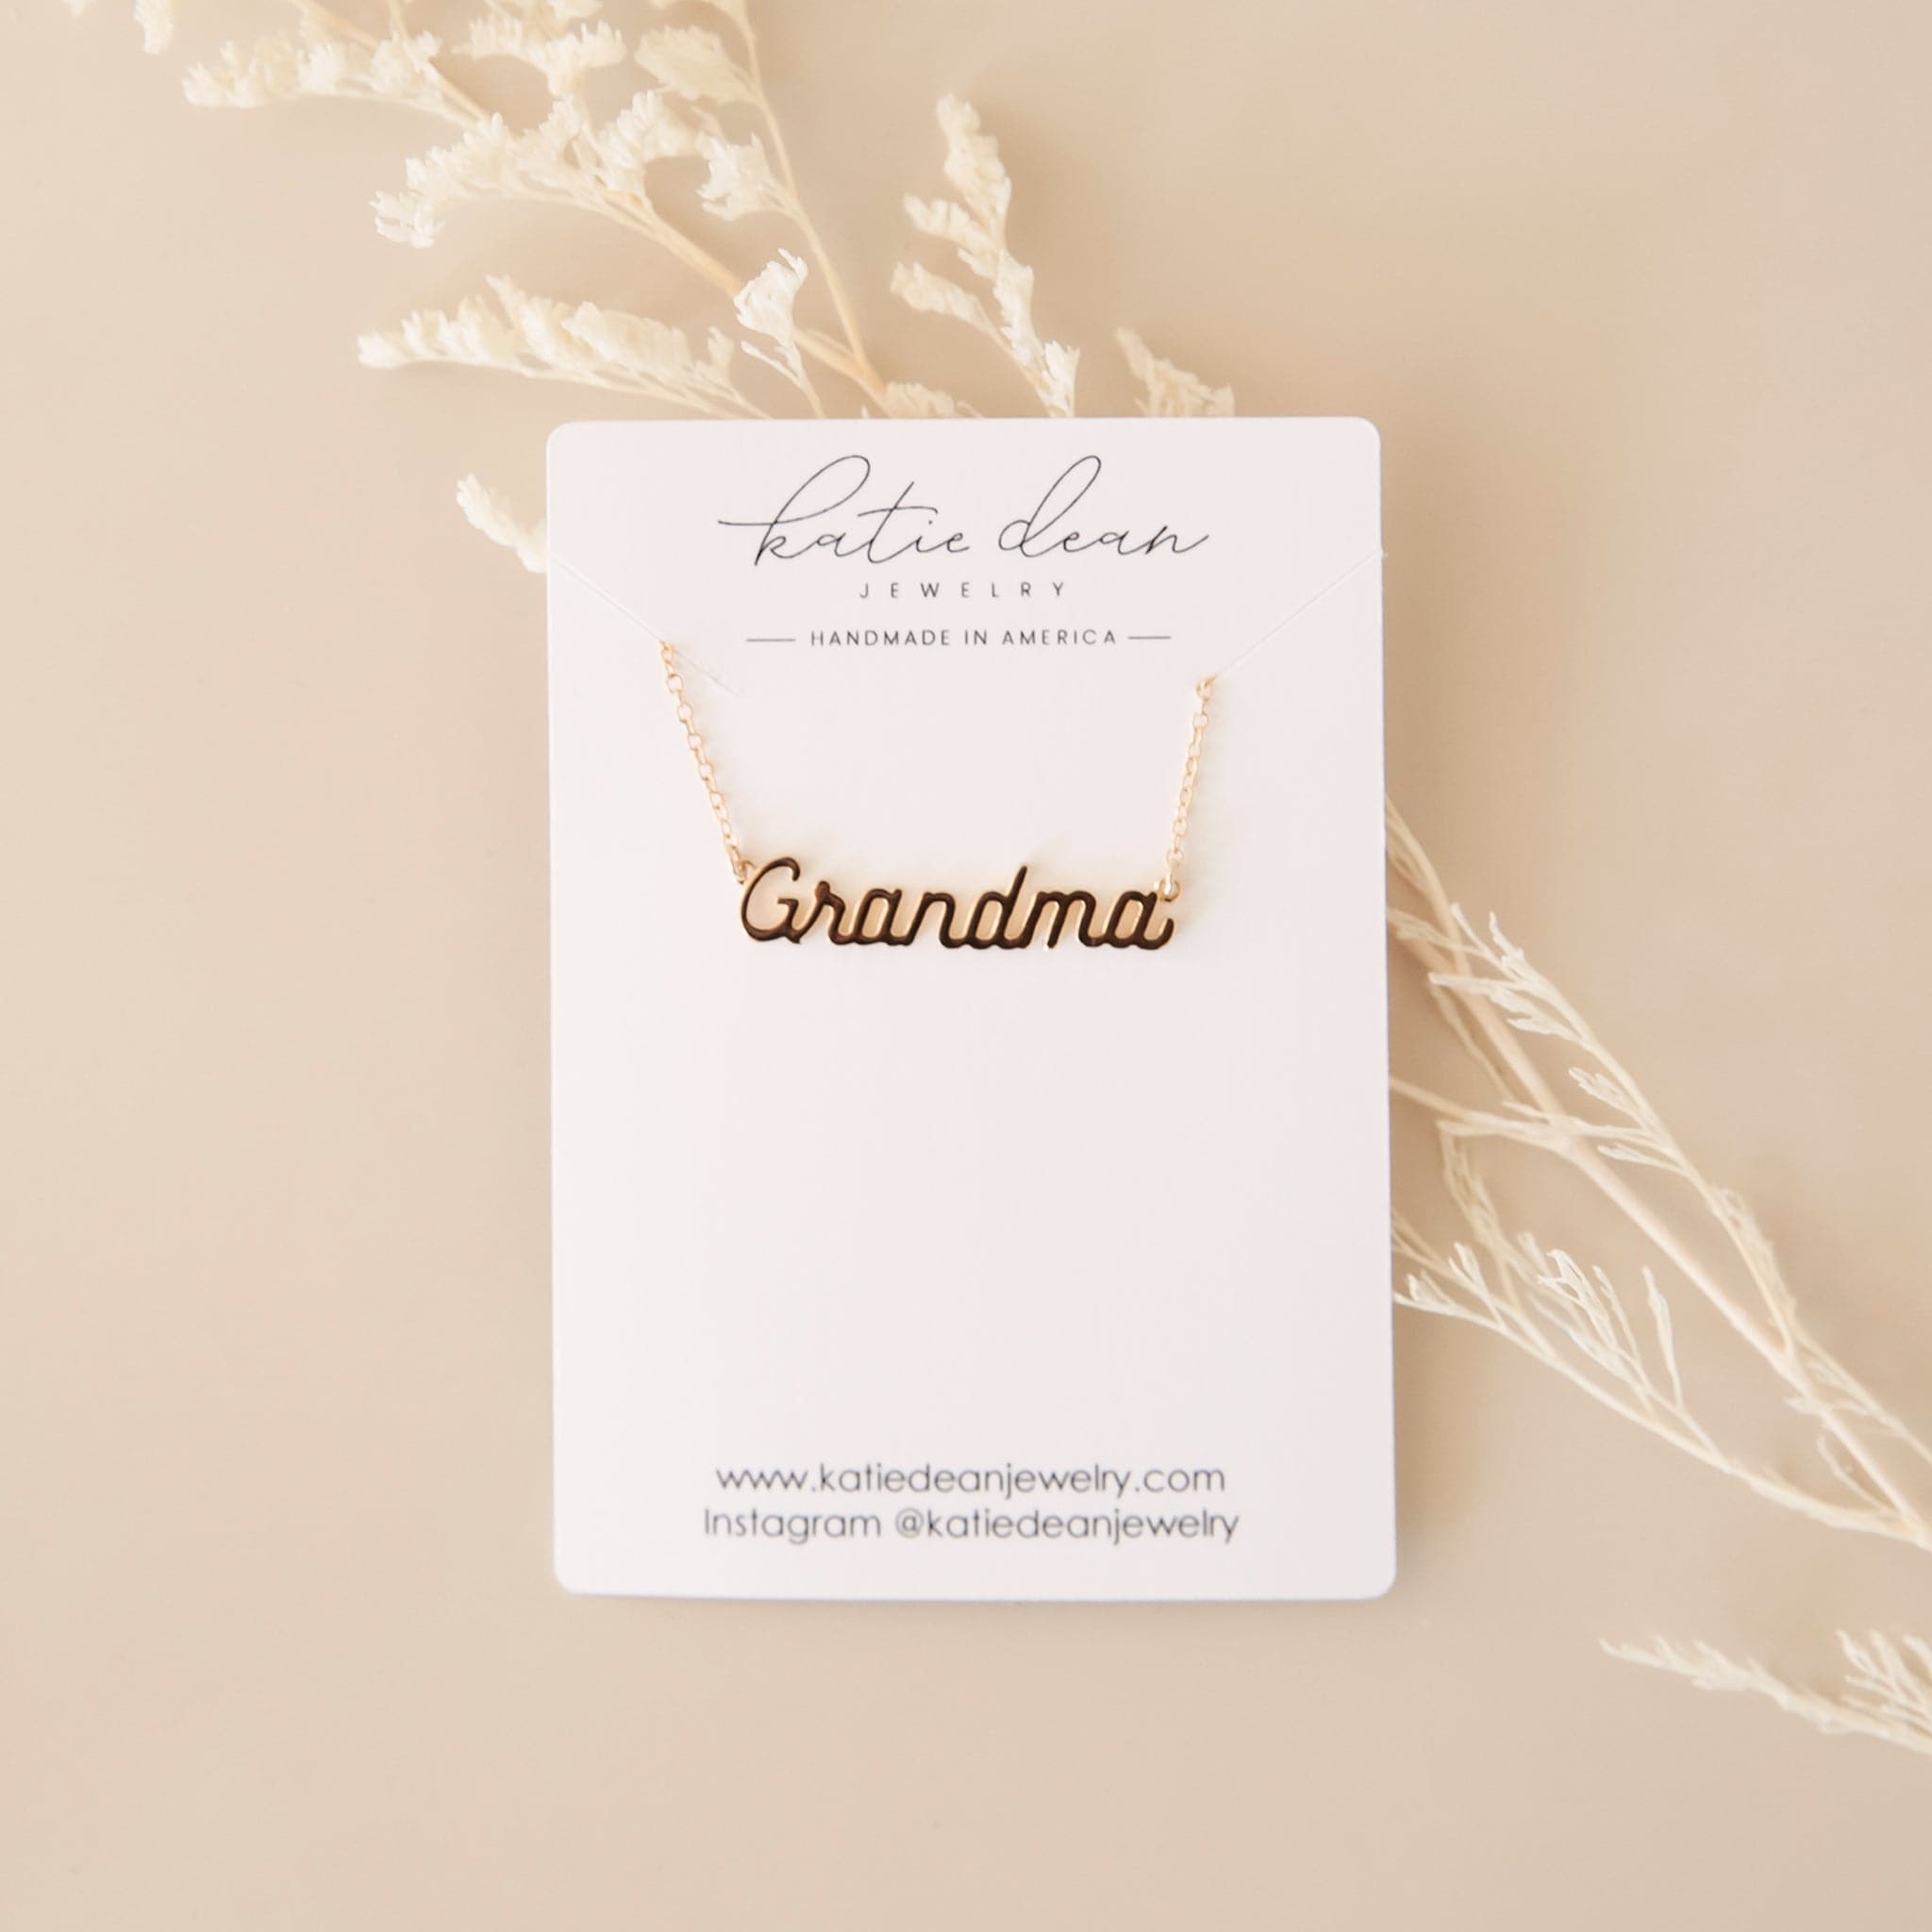 A dainty gold chain necklace with gold letters that read, "Grandma" as a pendant on a white cardboard rectangle that reads, "Katie Dean Jewelry".